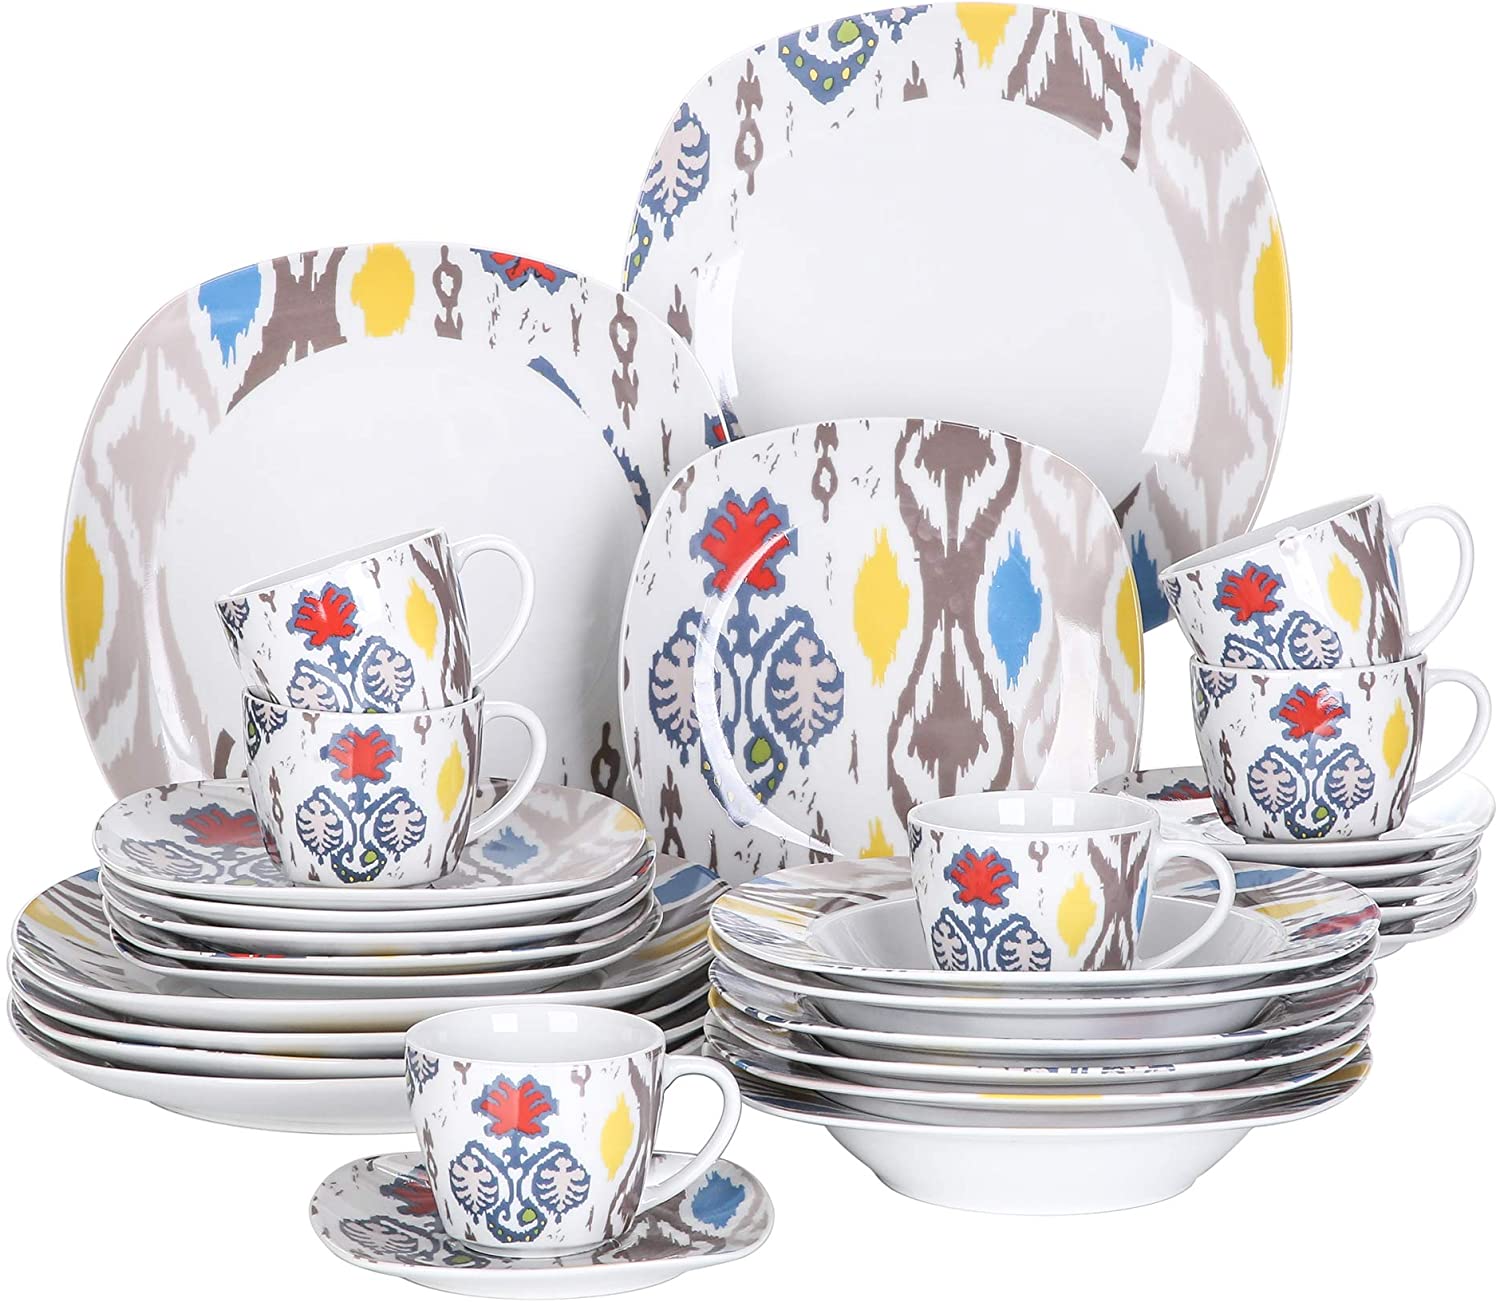 VEWEET Dinner Service 30 Pieces | Crockery Set Includes Coffee Cups, Saucer, Dessert Plate, Dinner Plate and Soup Plate | Complete Service for 6 People